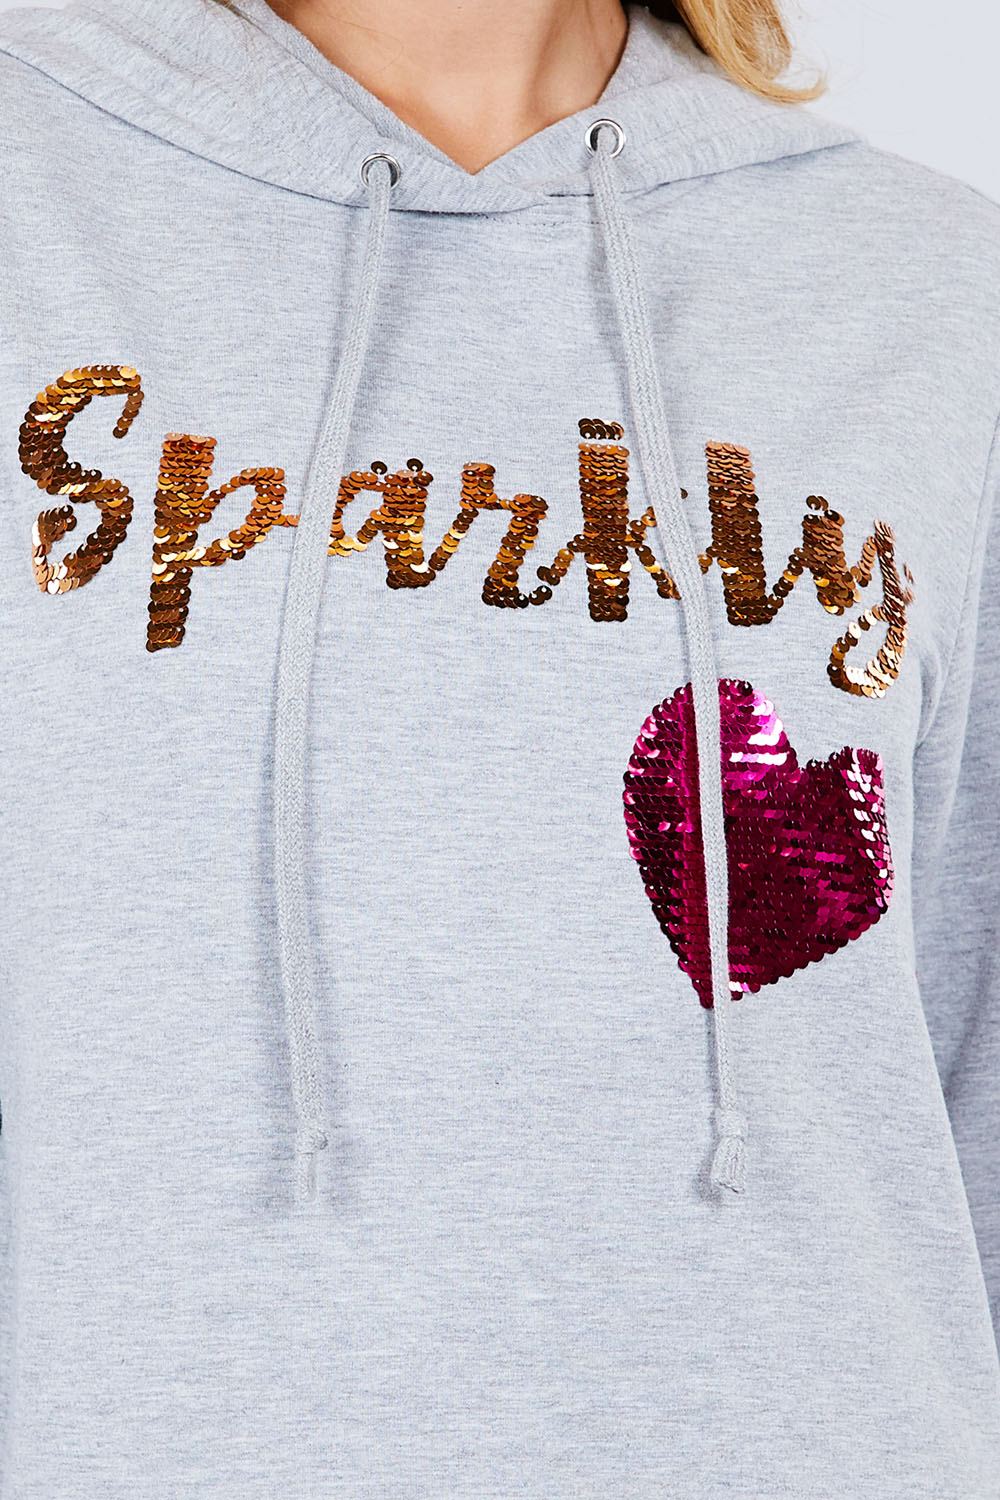 Sparkly Sequins Hoodie Pullover Sparkly Sequins Hoodie Pullover - M&R CORNER M&R CORNER